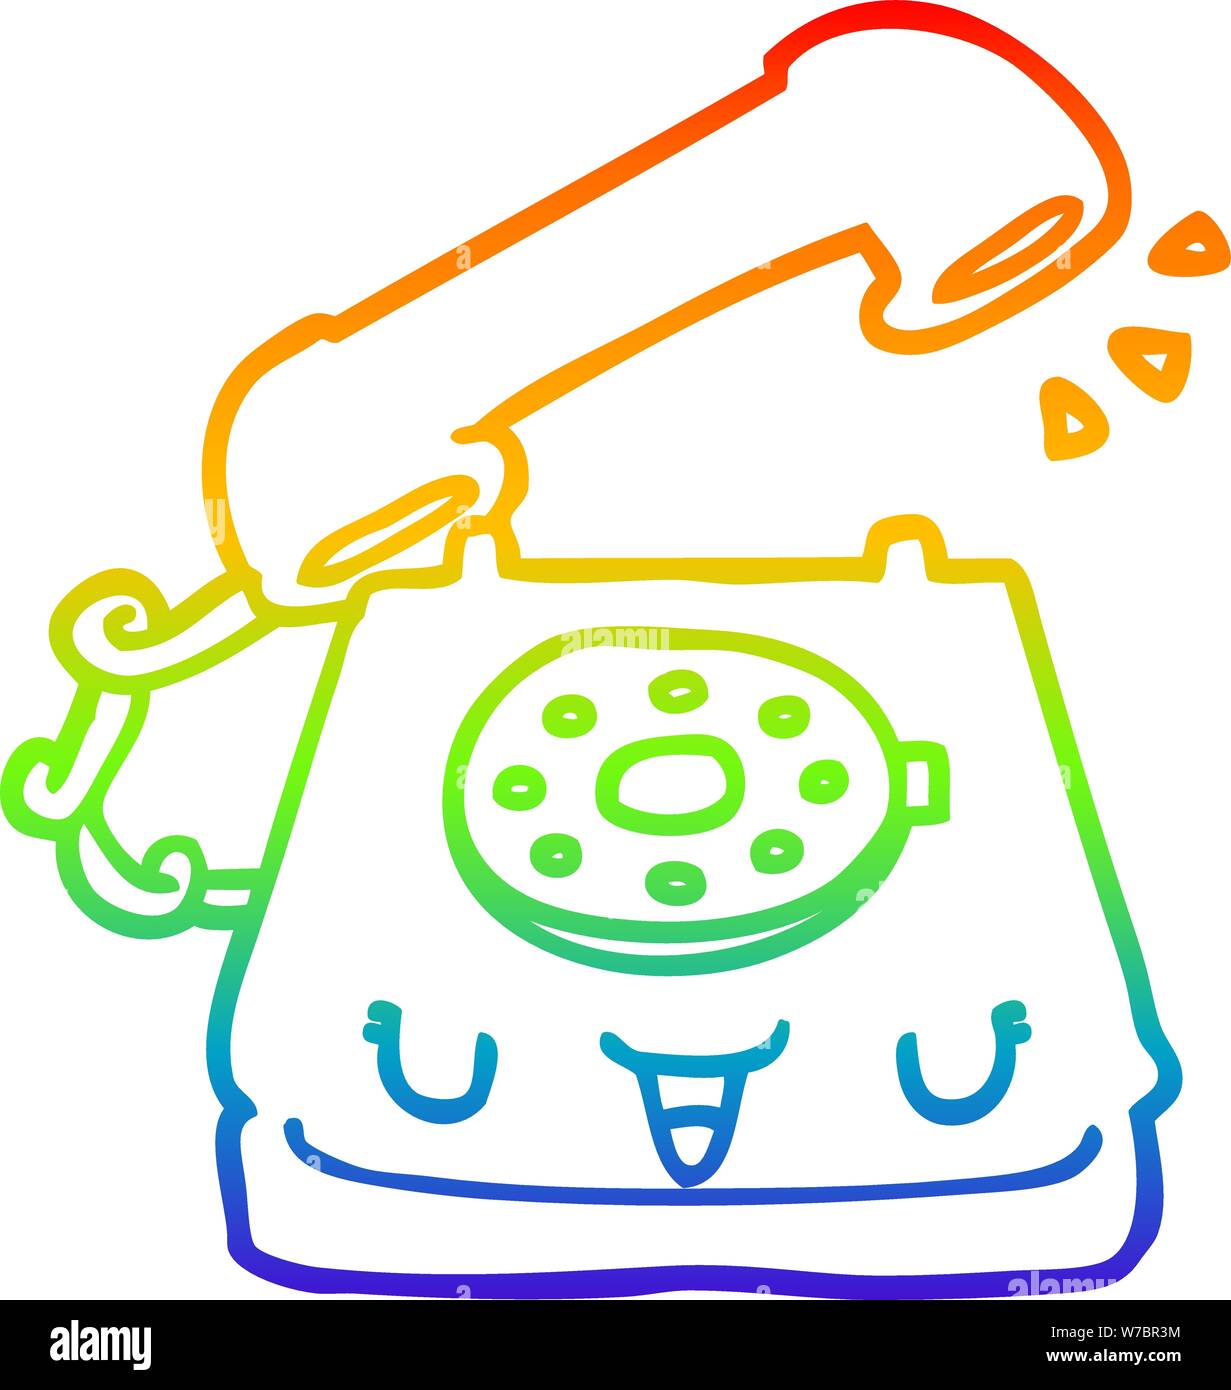 Rotary telephone sketch by lhfgraphics Vectors & Illustrations with  Unlimited Downloads - Yayimages